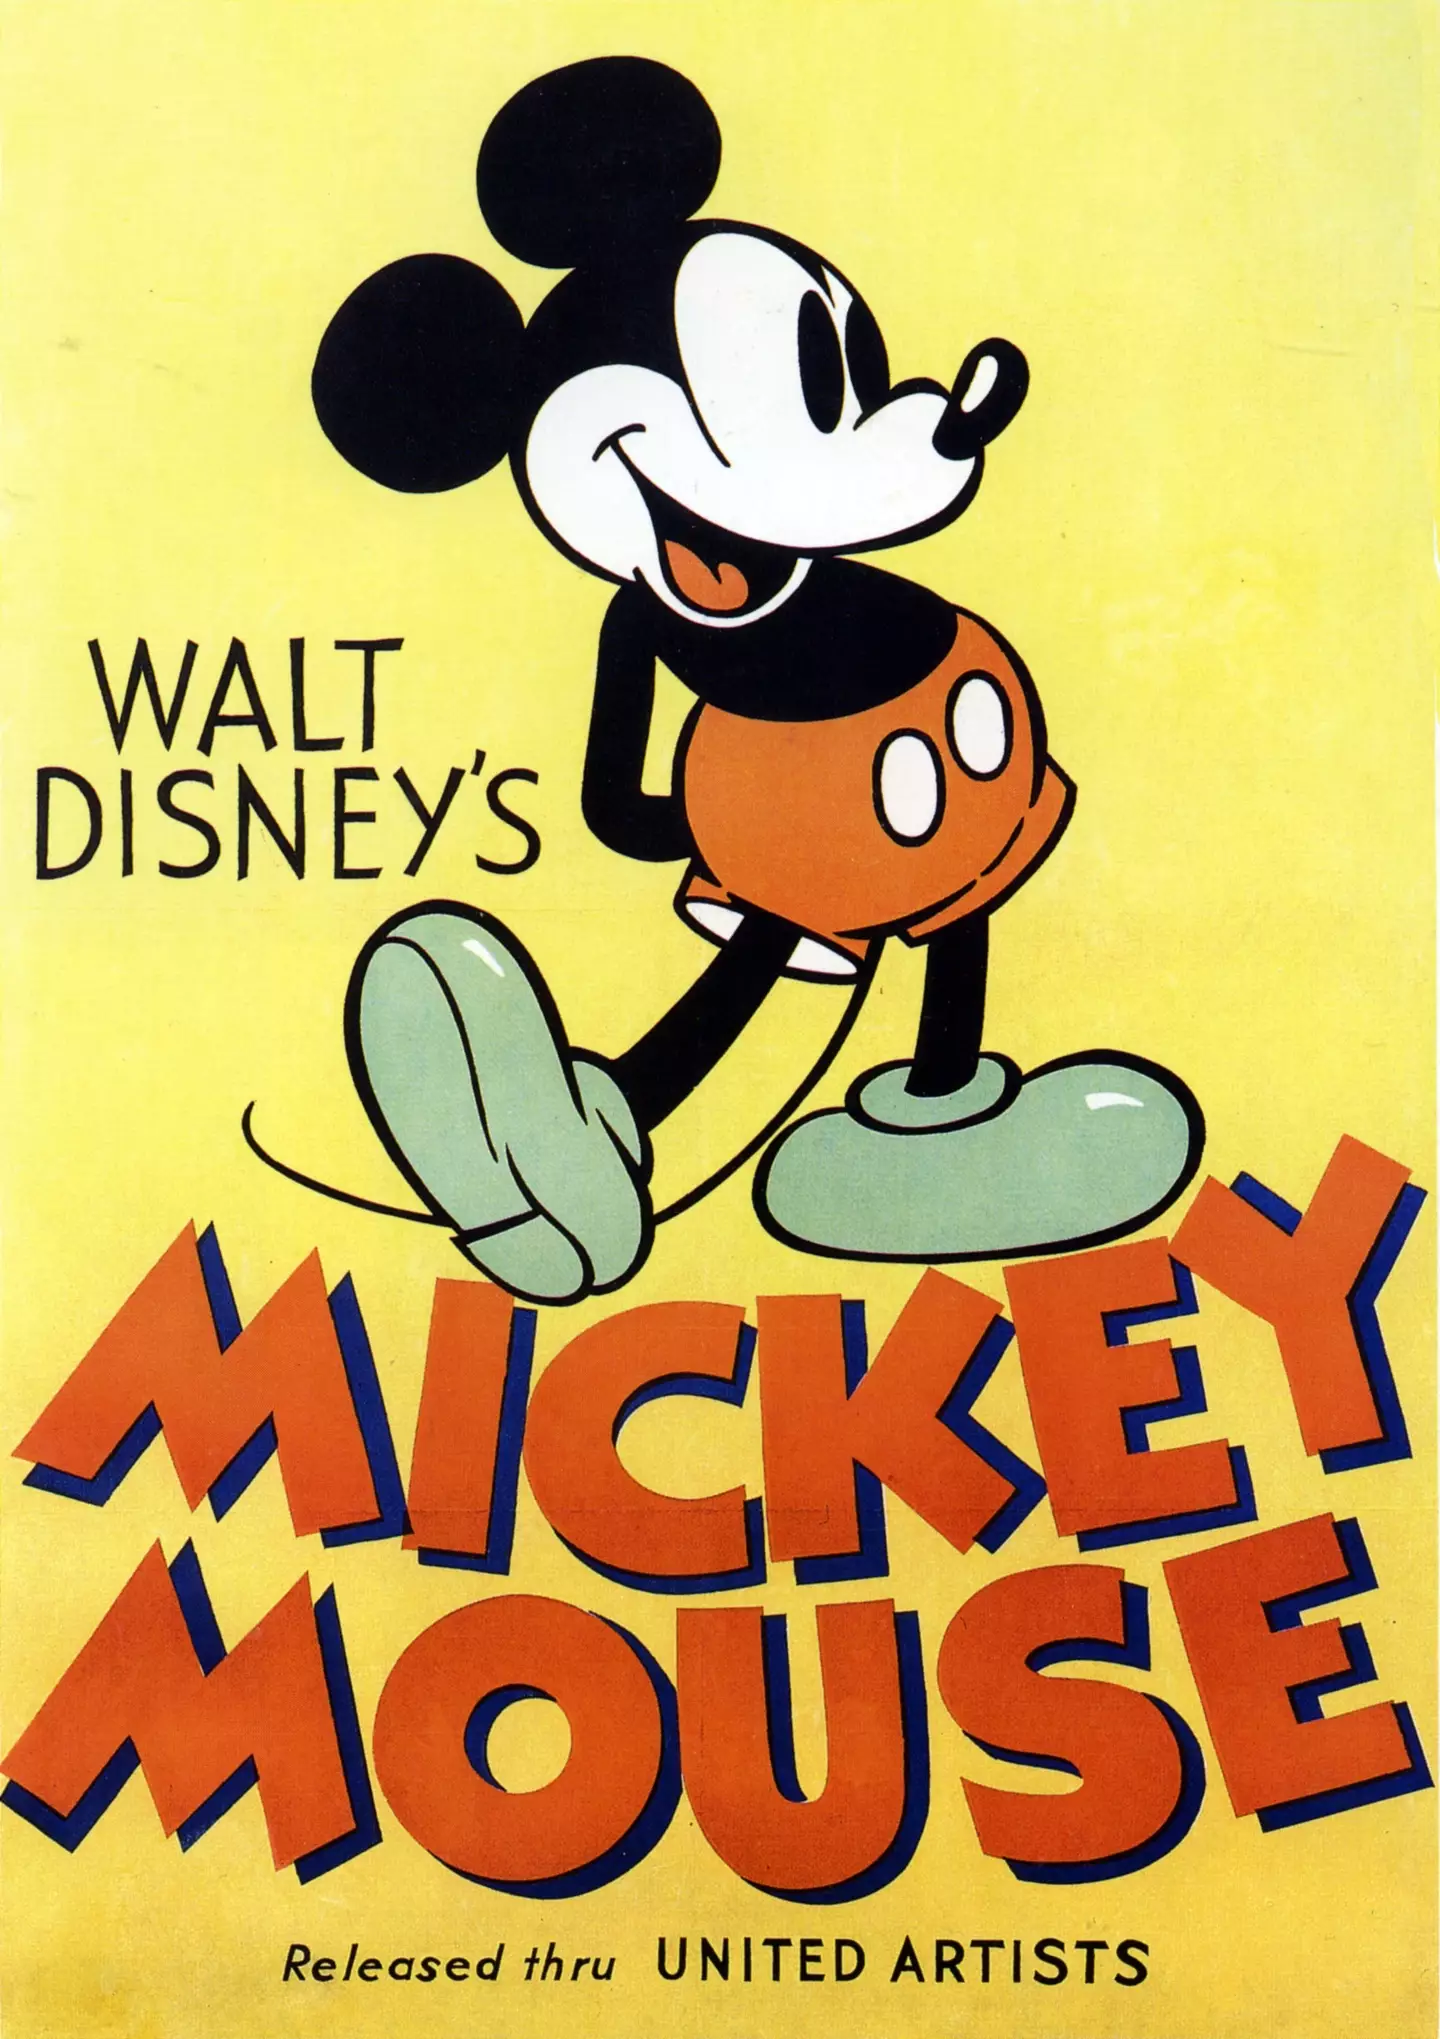 Mickey Mouse was originally created way back in 1928.